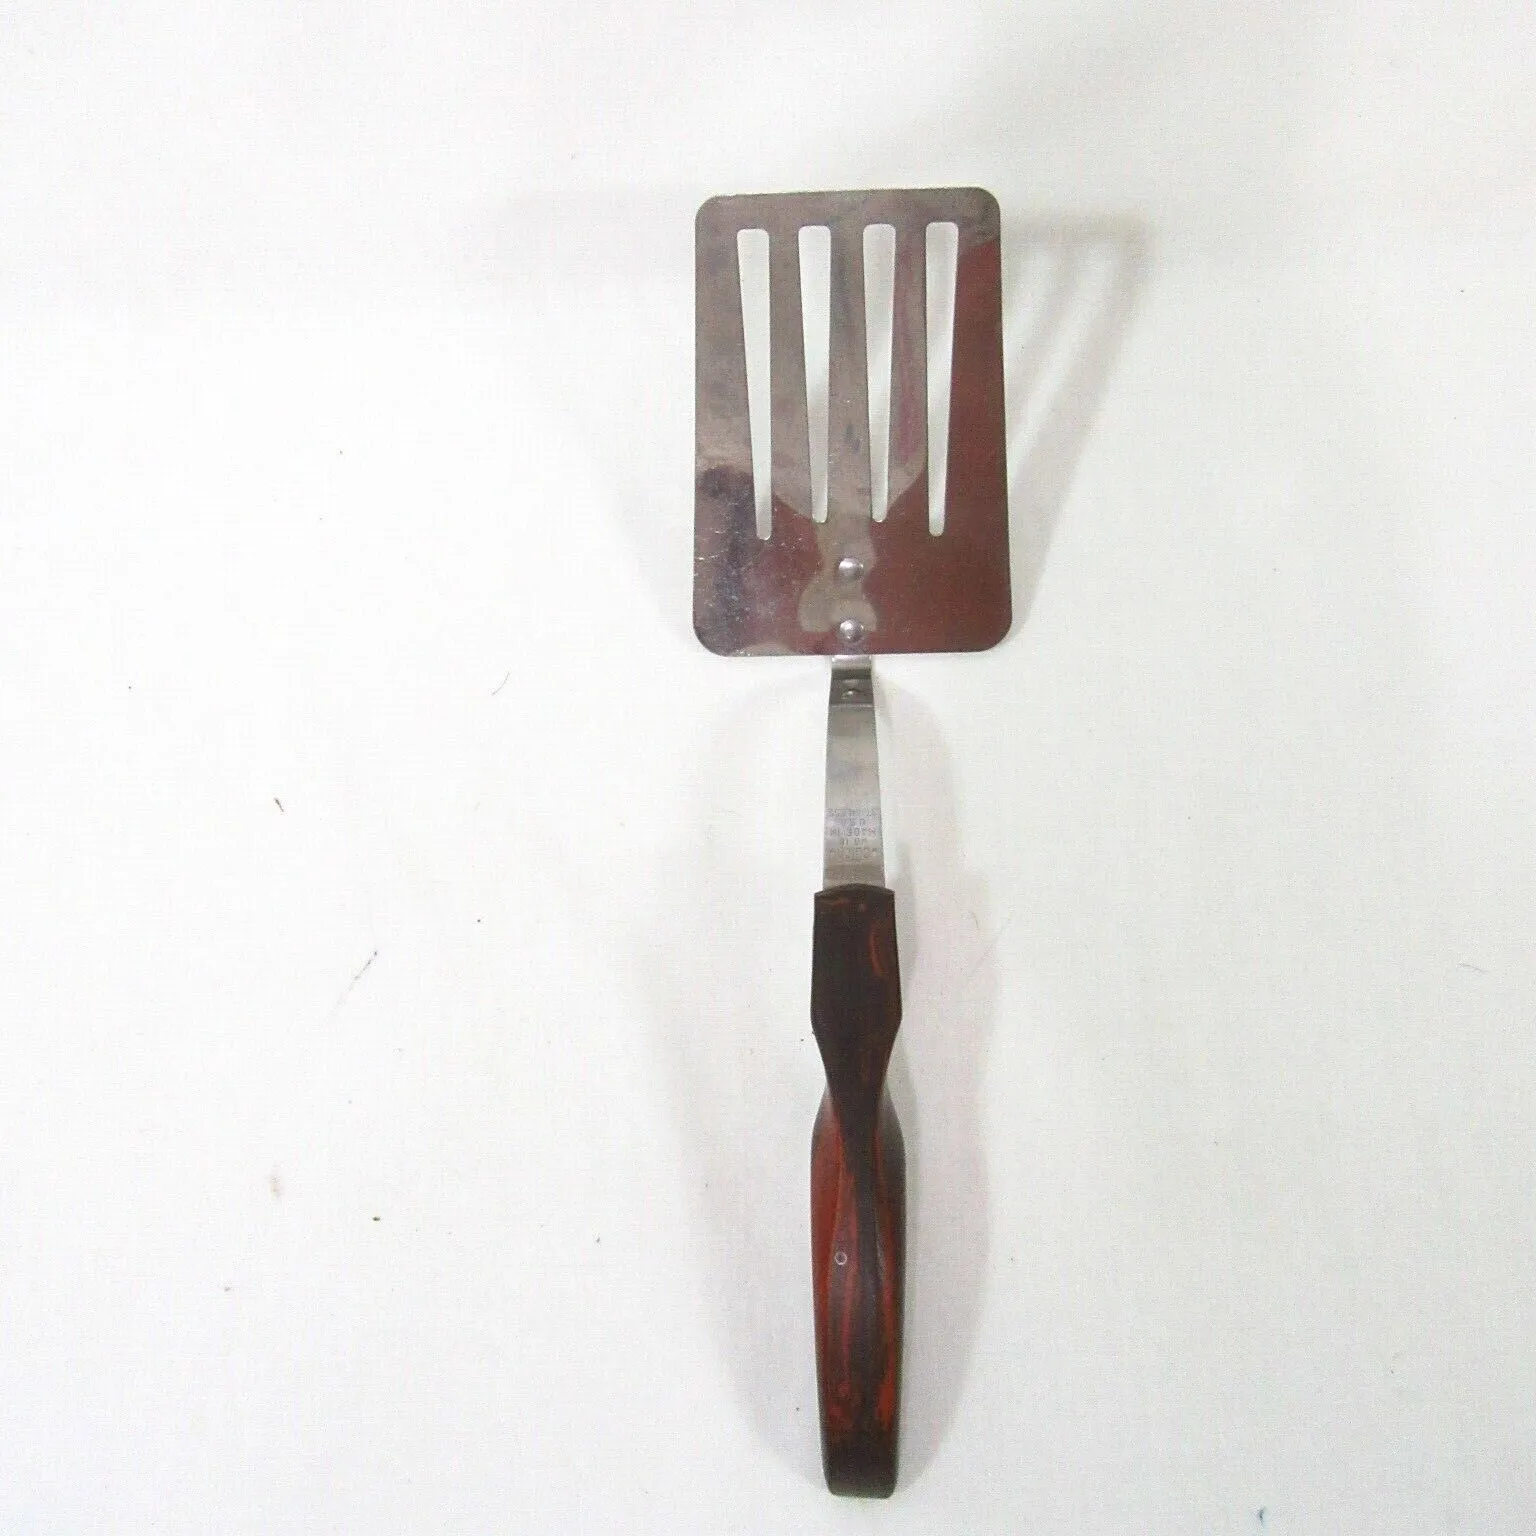 CUTCO No 16 Stainless Steel Brown Handle 12-inch Slotted Spatula - $30.00